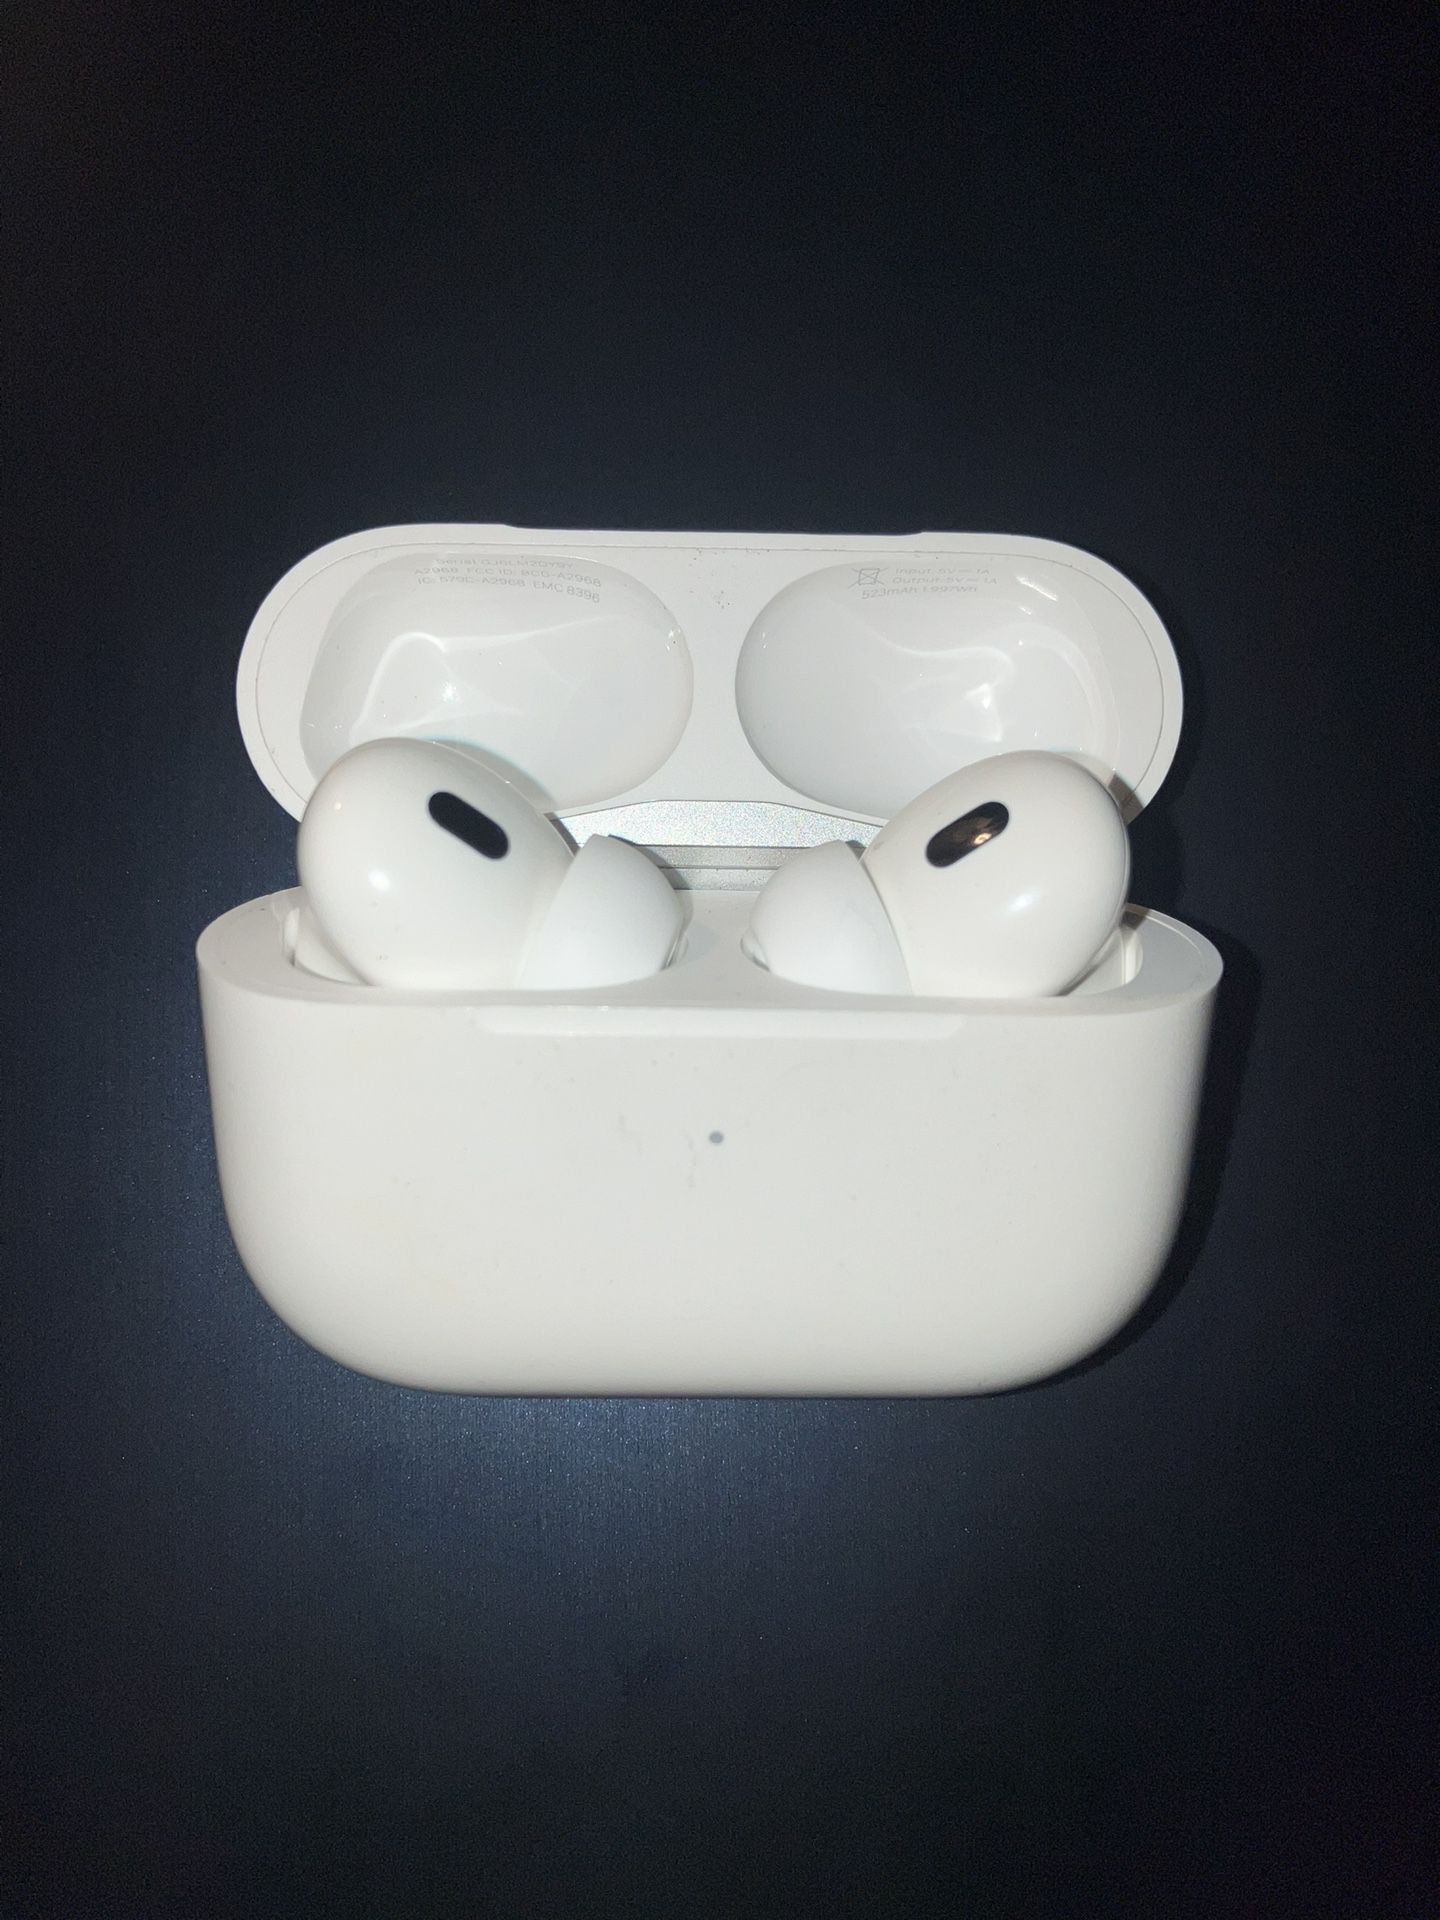 AirPods Pro (2nd generation) with MagSafe Charging Case (USB-C)